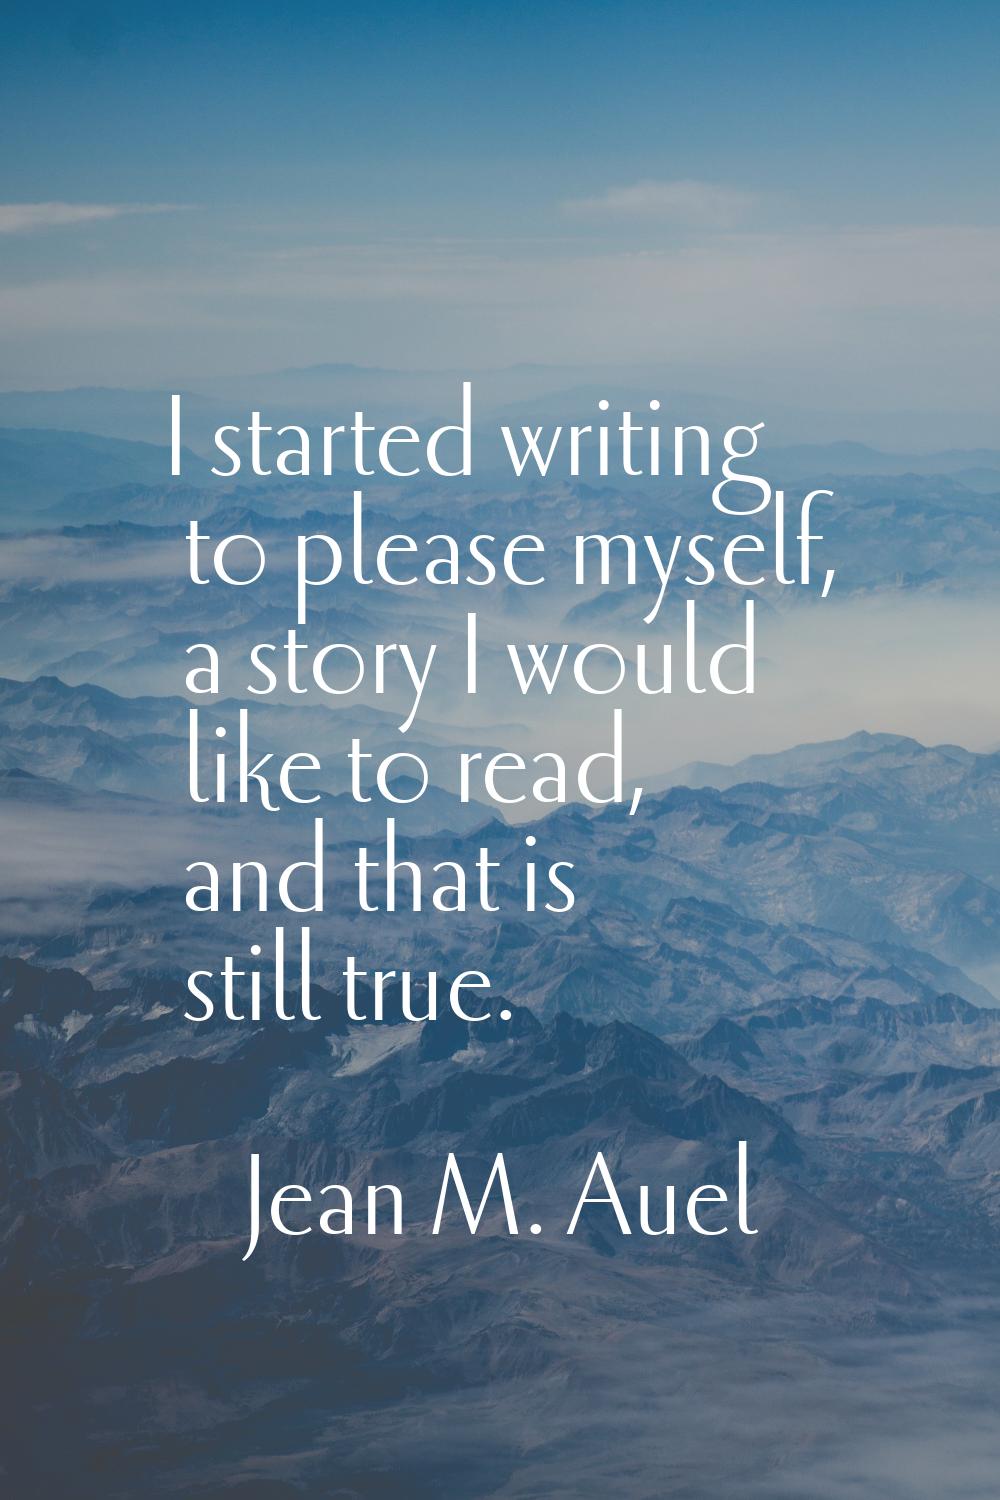 I started writing to please myself, a story I would like to read, and that is still true.